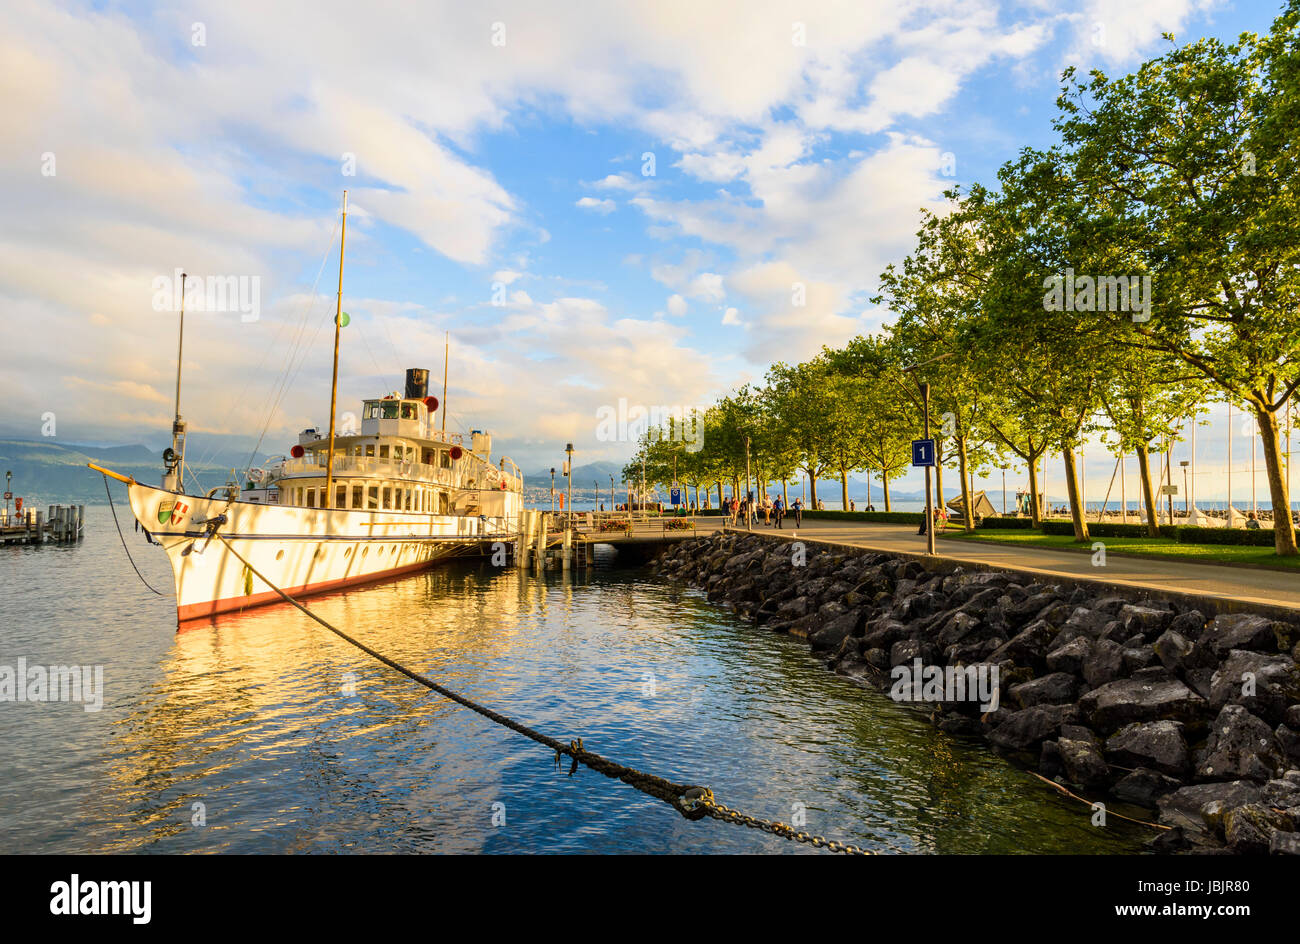 Lausanne waterfront with CGN Rhone, a paddle steamer boat moored in the port of Ouchy, Lausanne, Switzerland Stock Photo